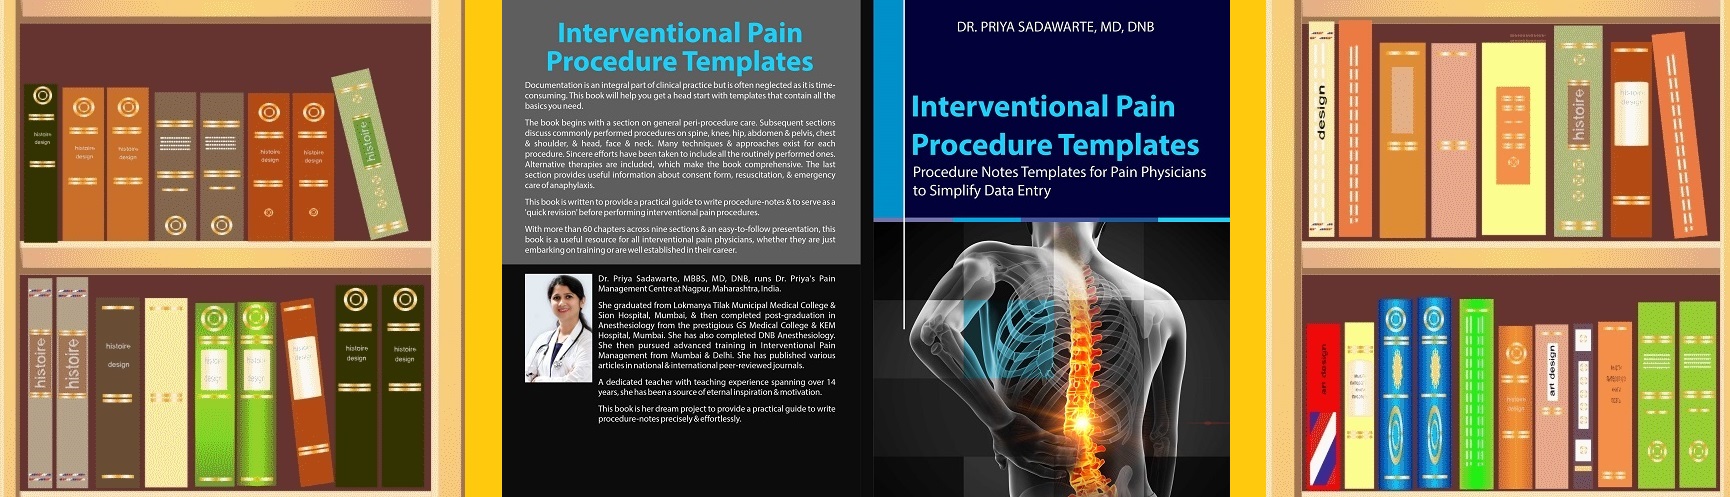 interventional-pain-procedure-templates-about-book